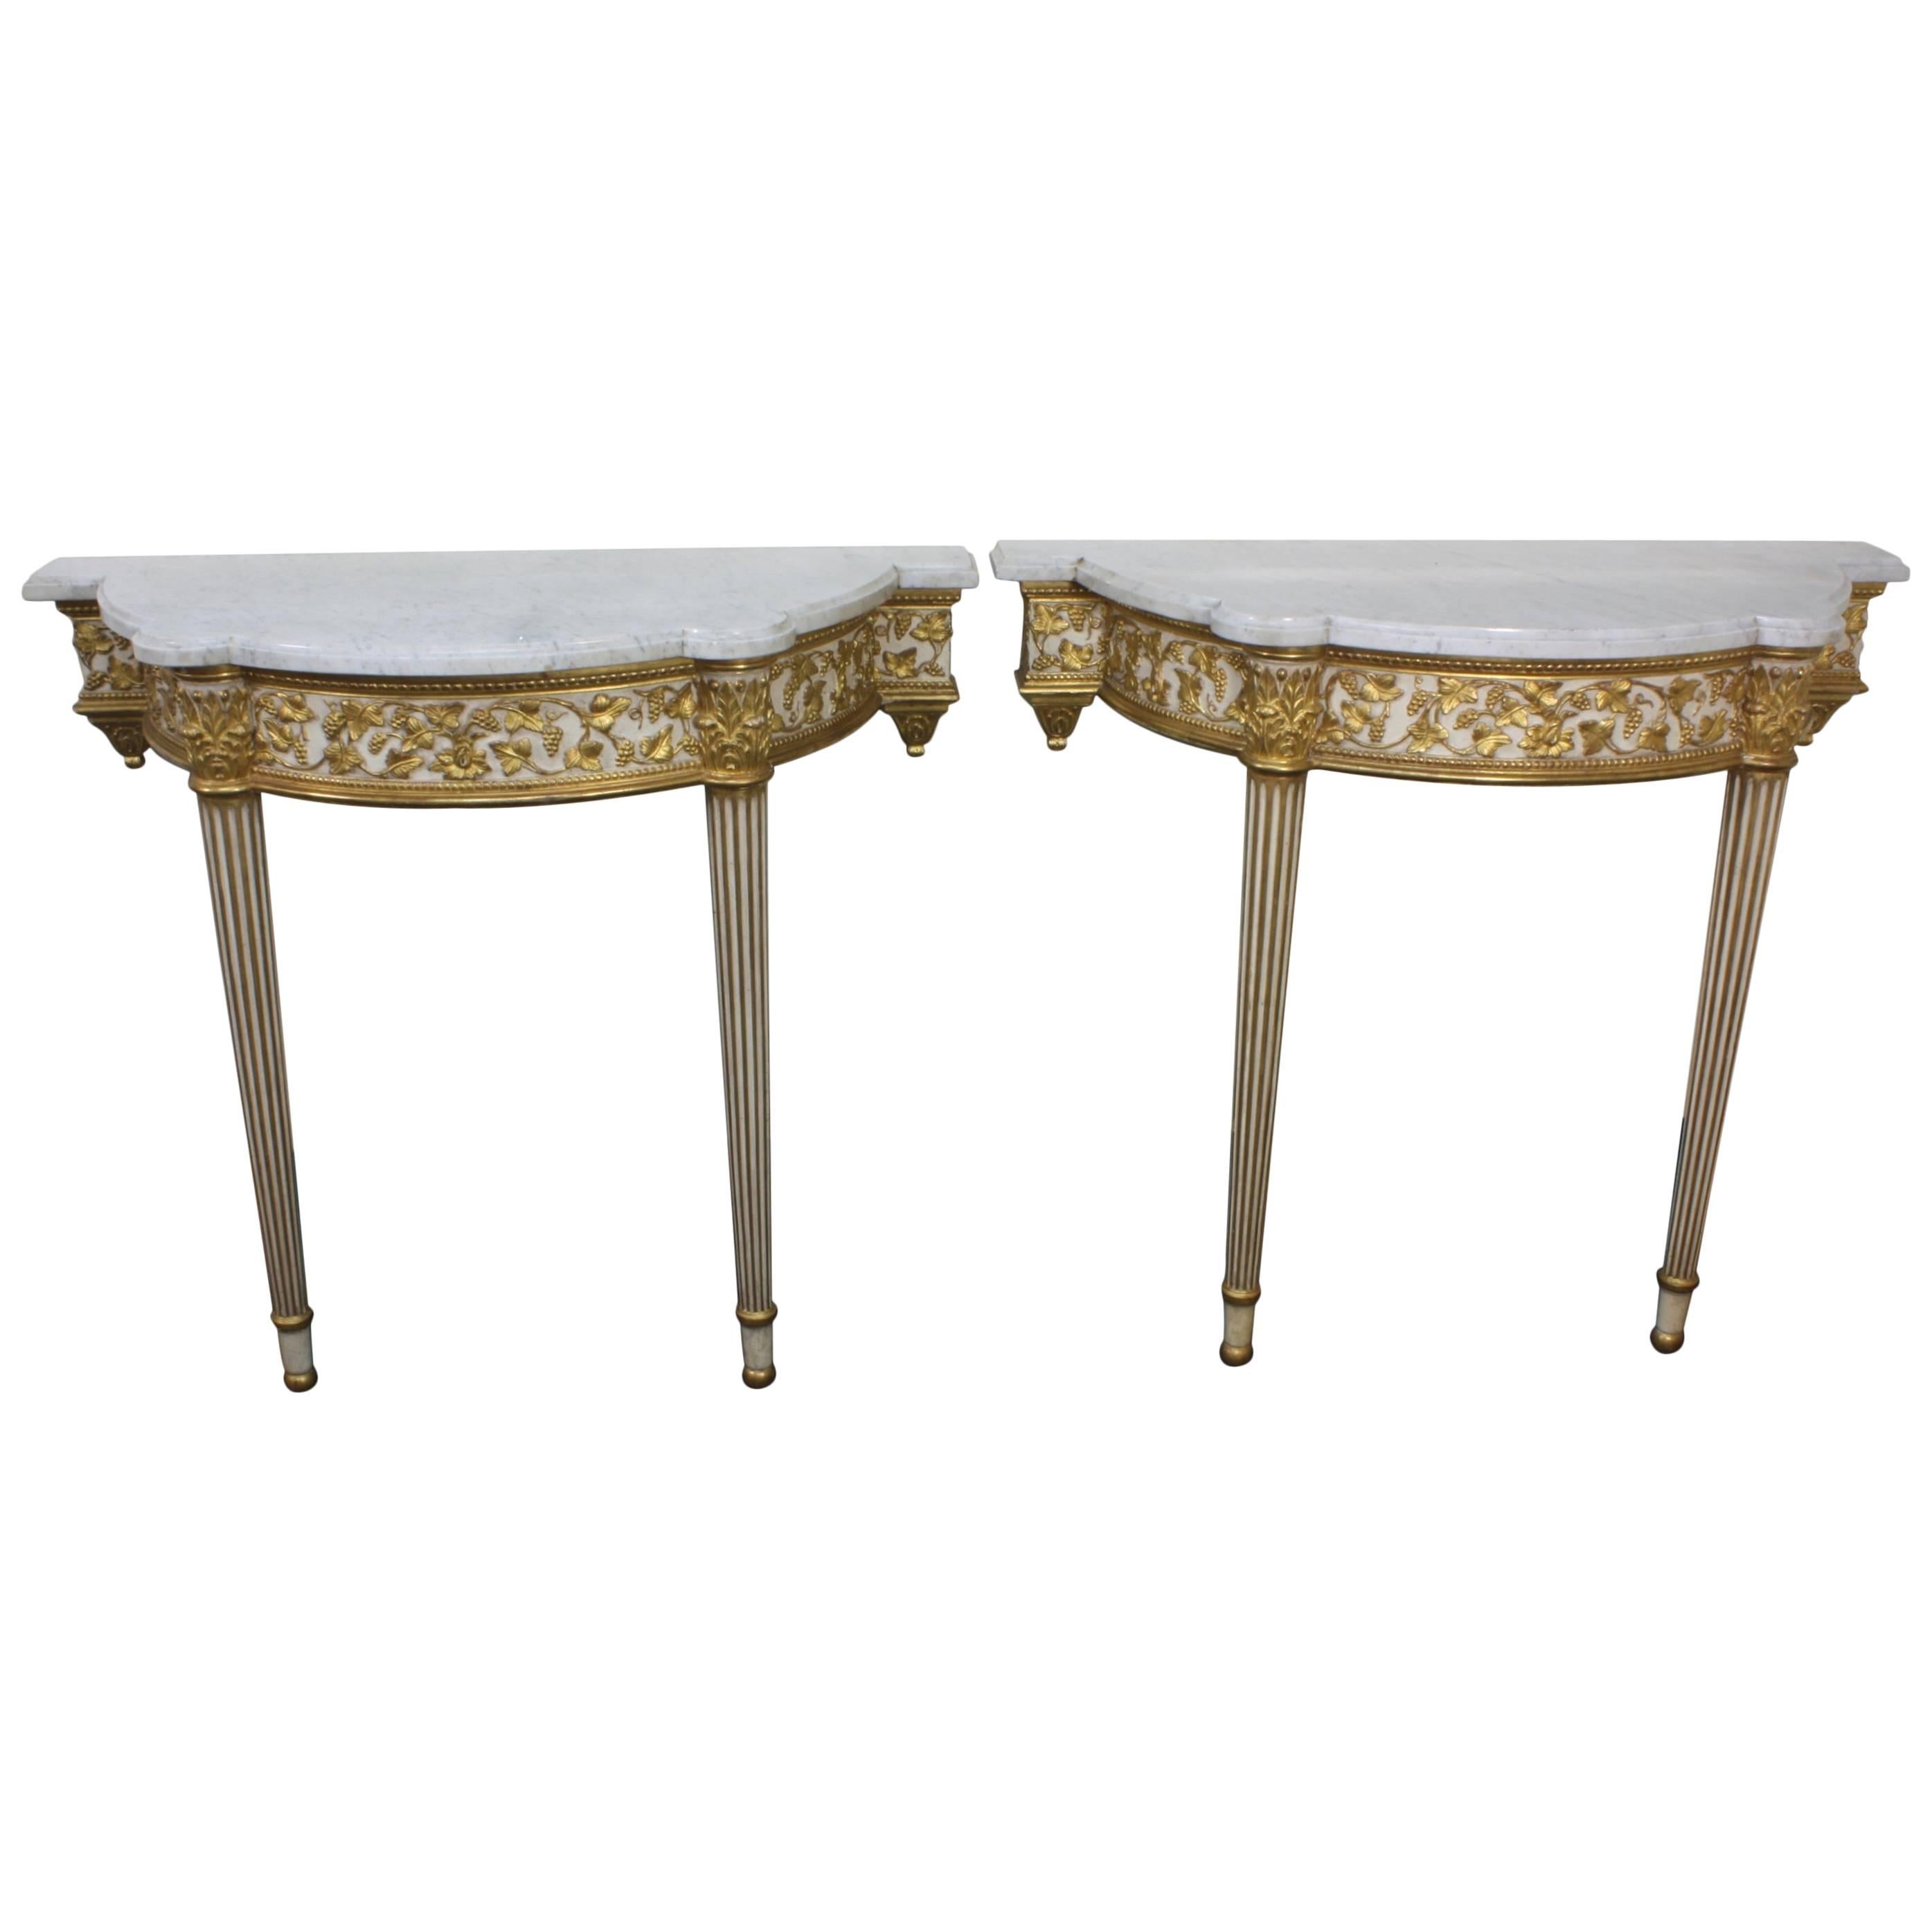 Pair of Fine Quality Louis XVI Style Console Tables